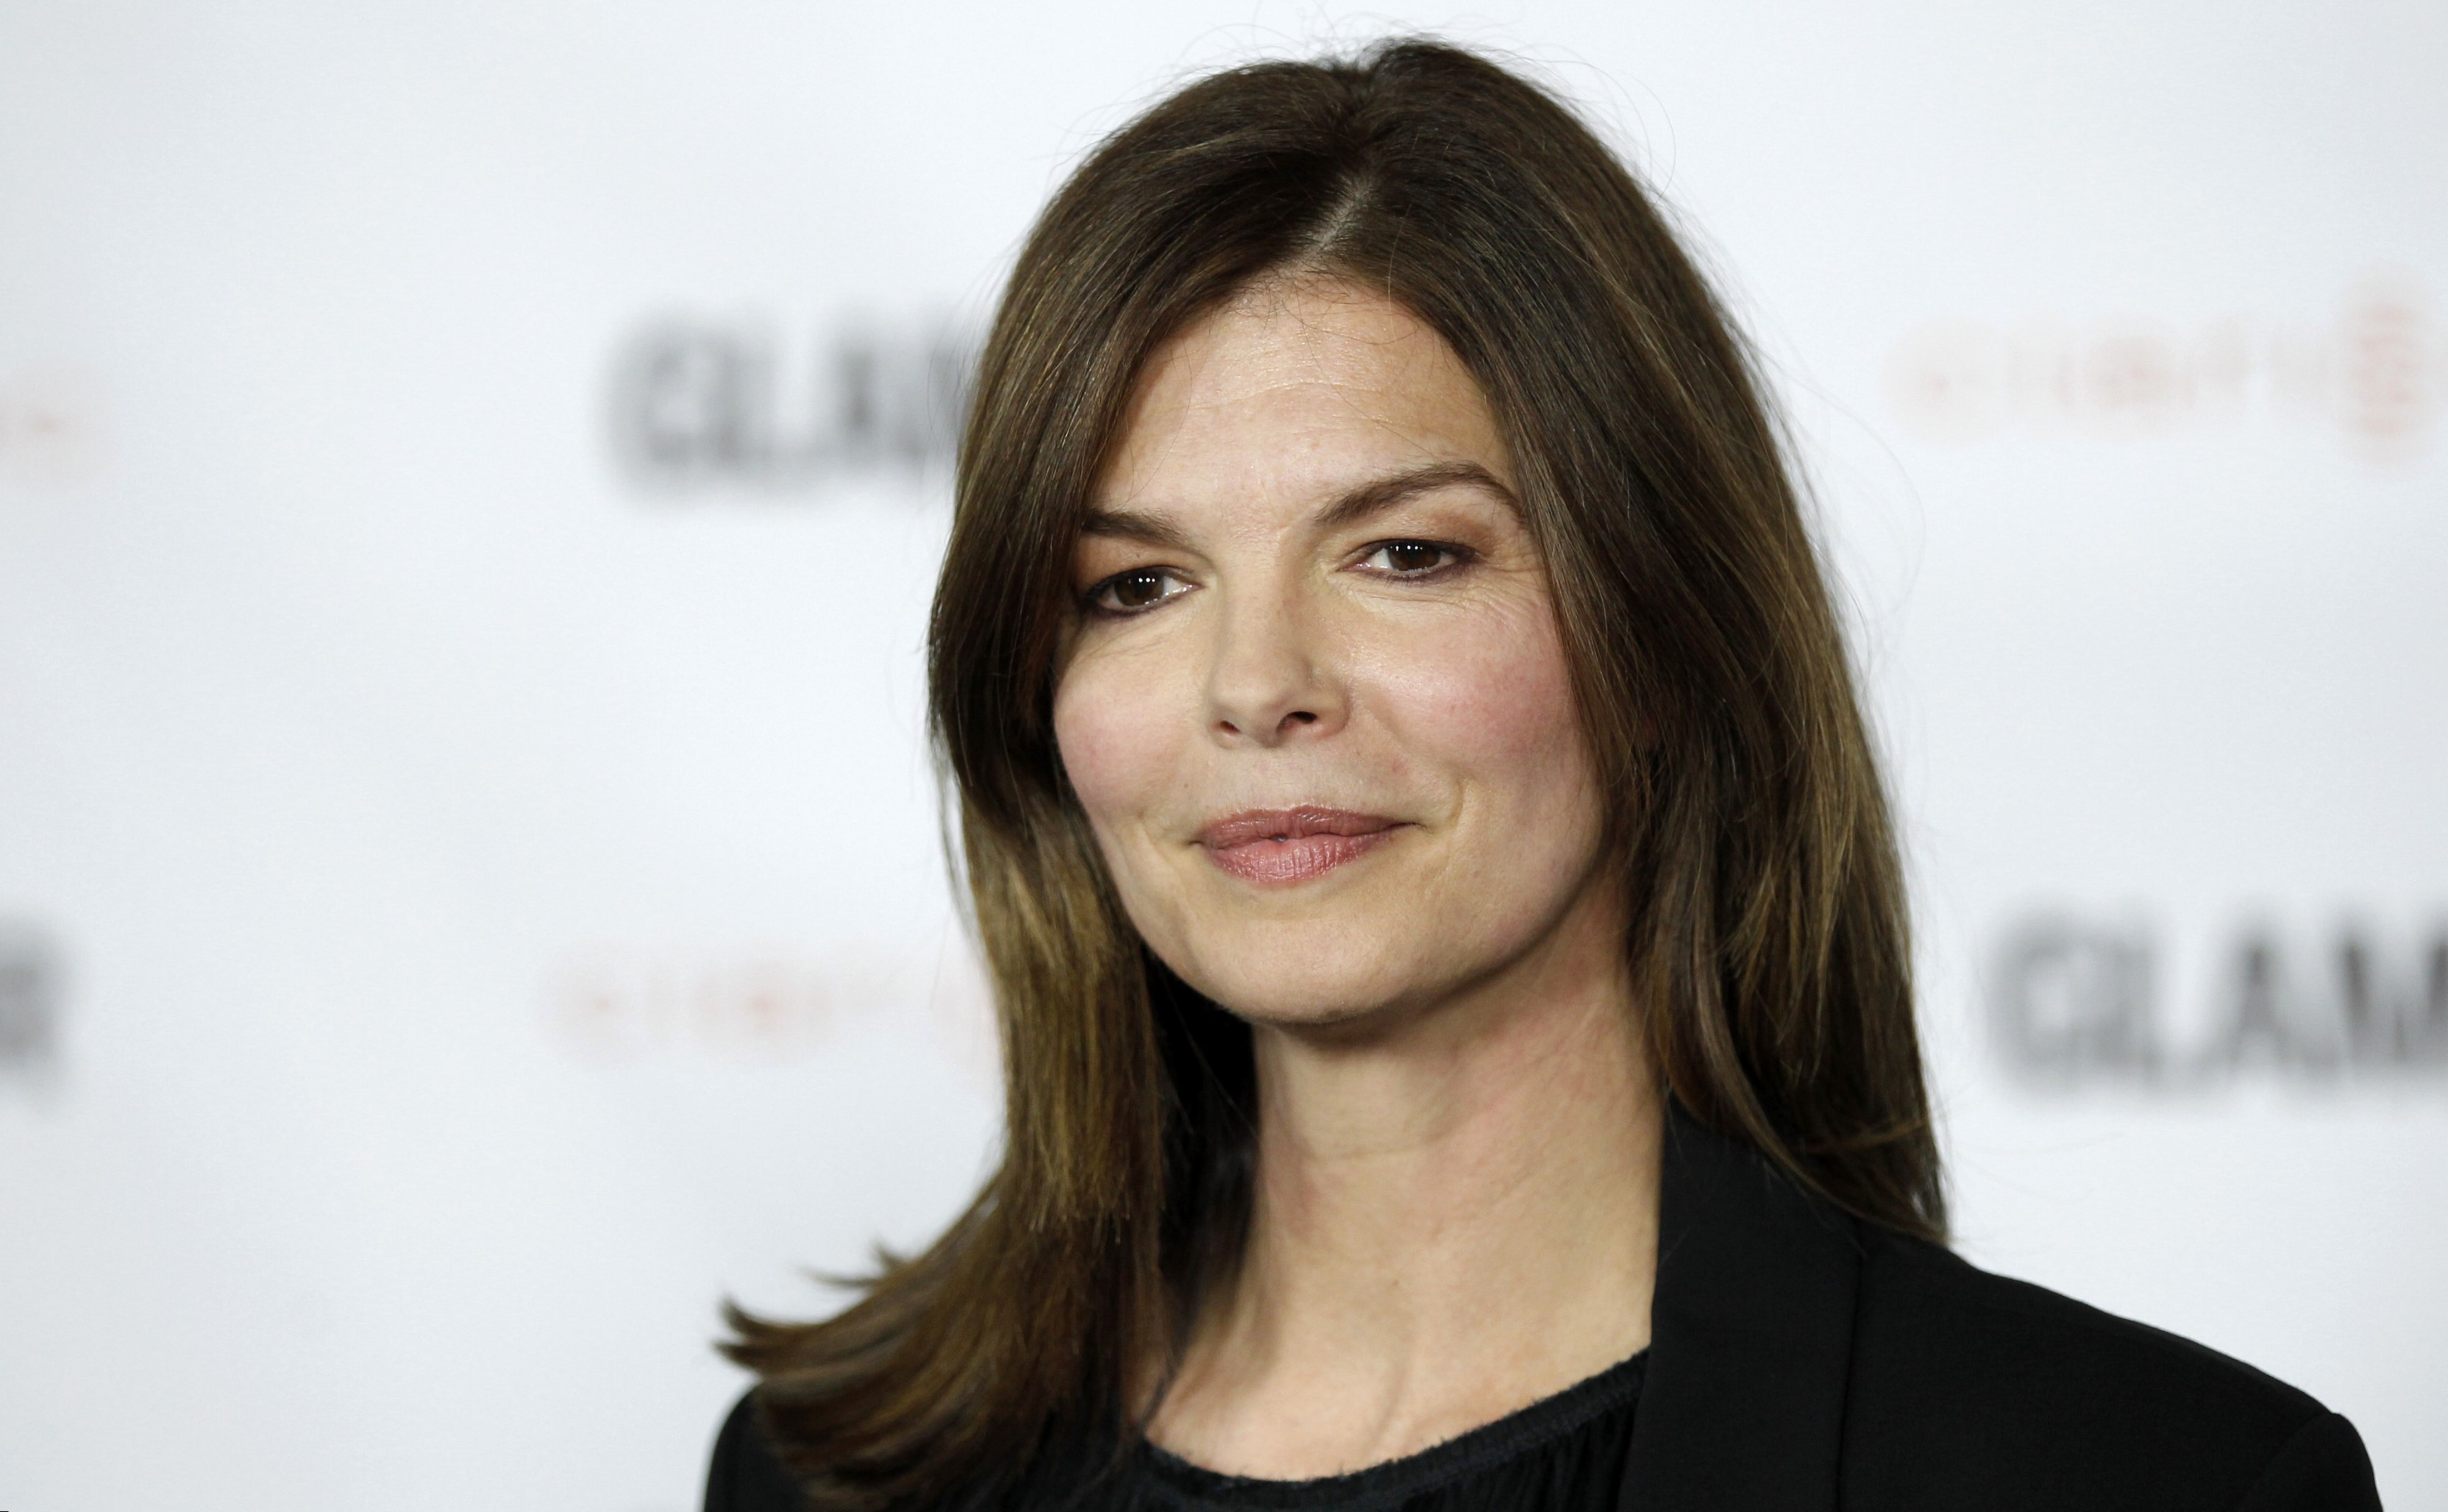 Jeanne Tripplehorn weight, height and age. Body measurements